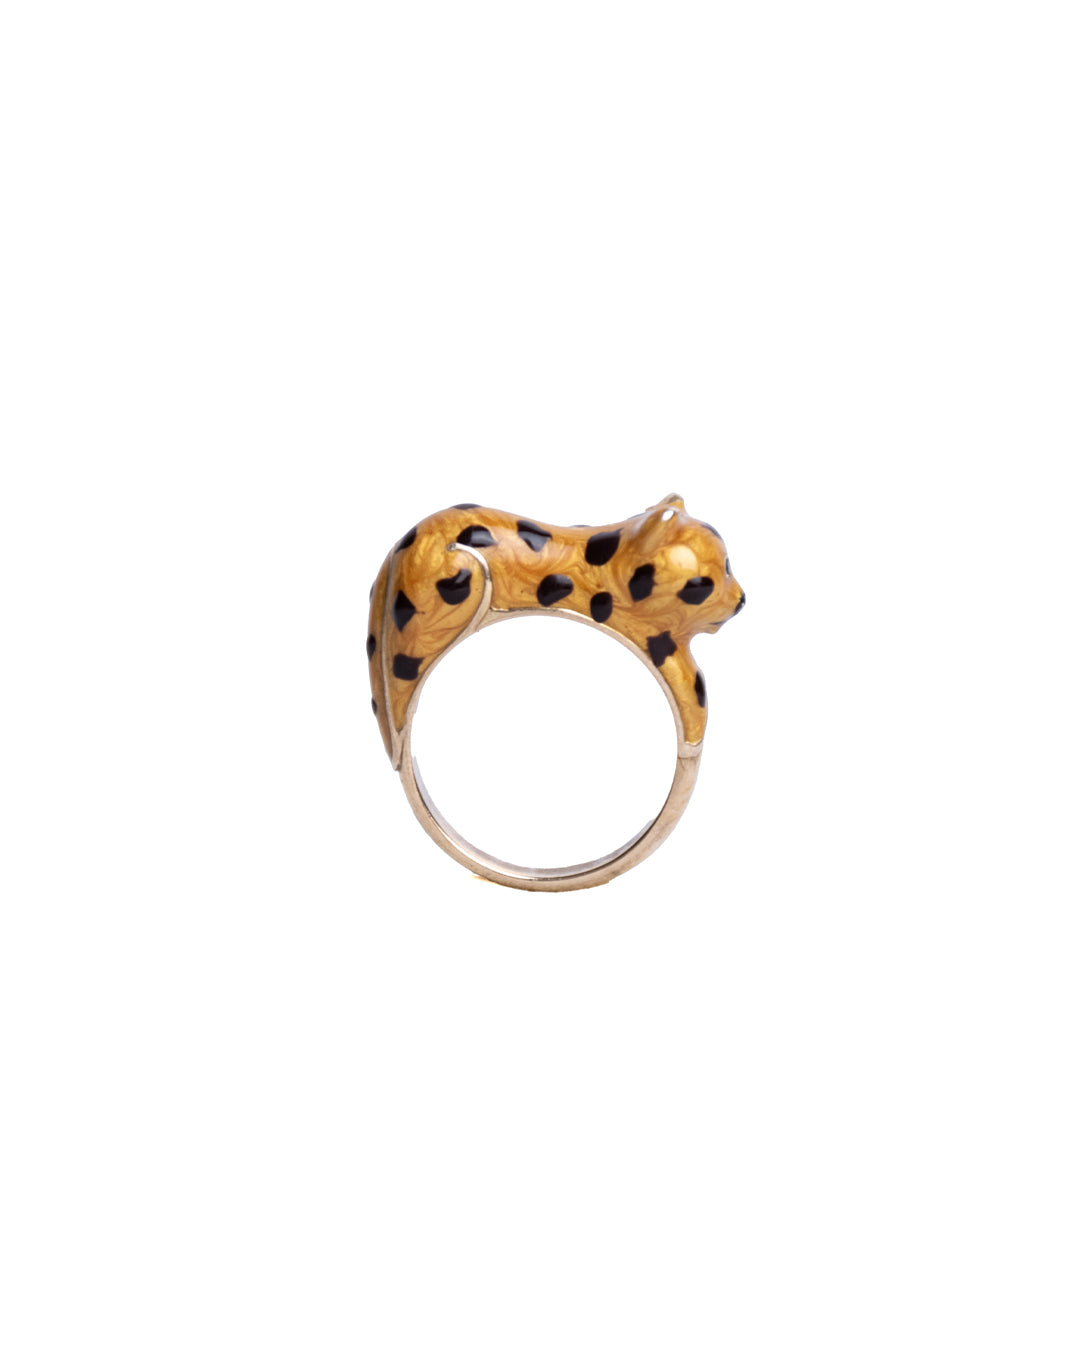 Handmade handcrafted leopard ring fun colorful